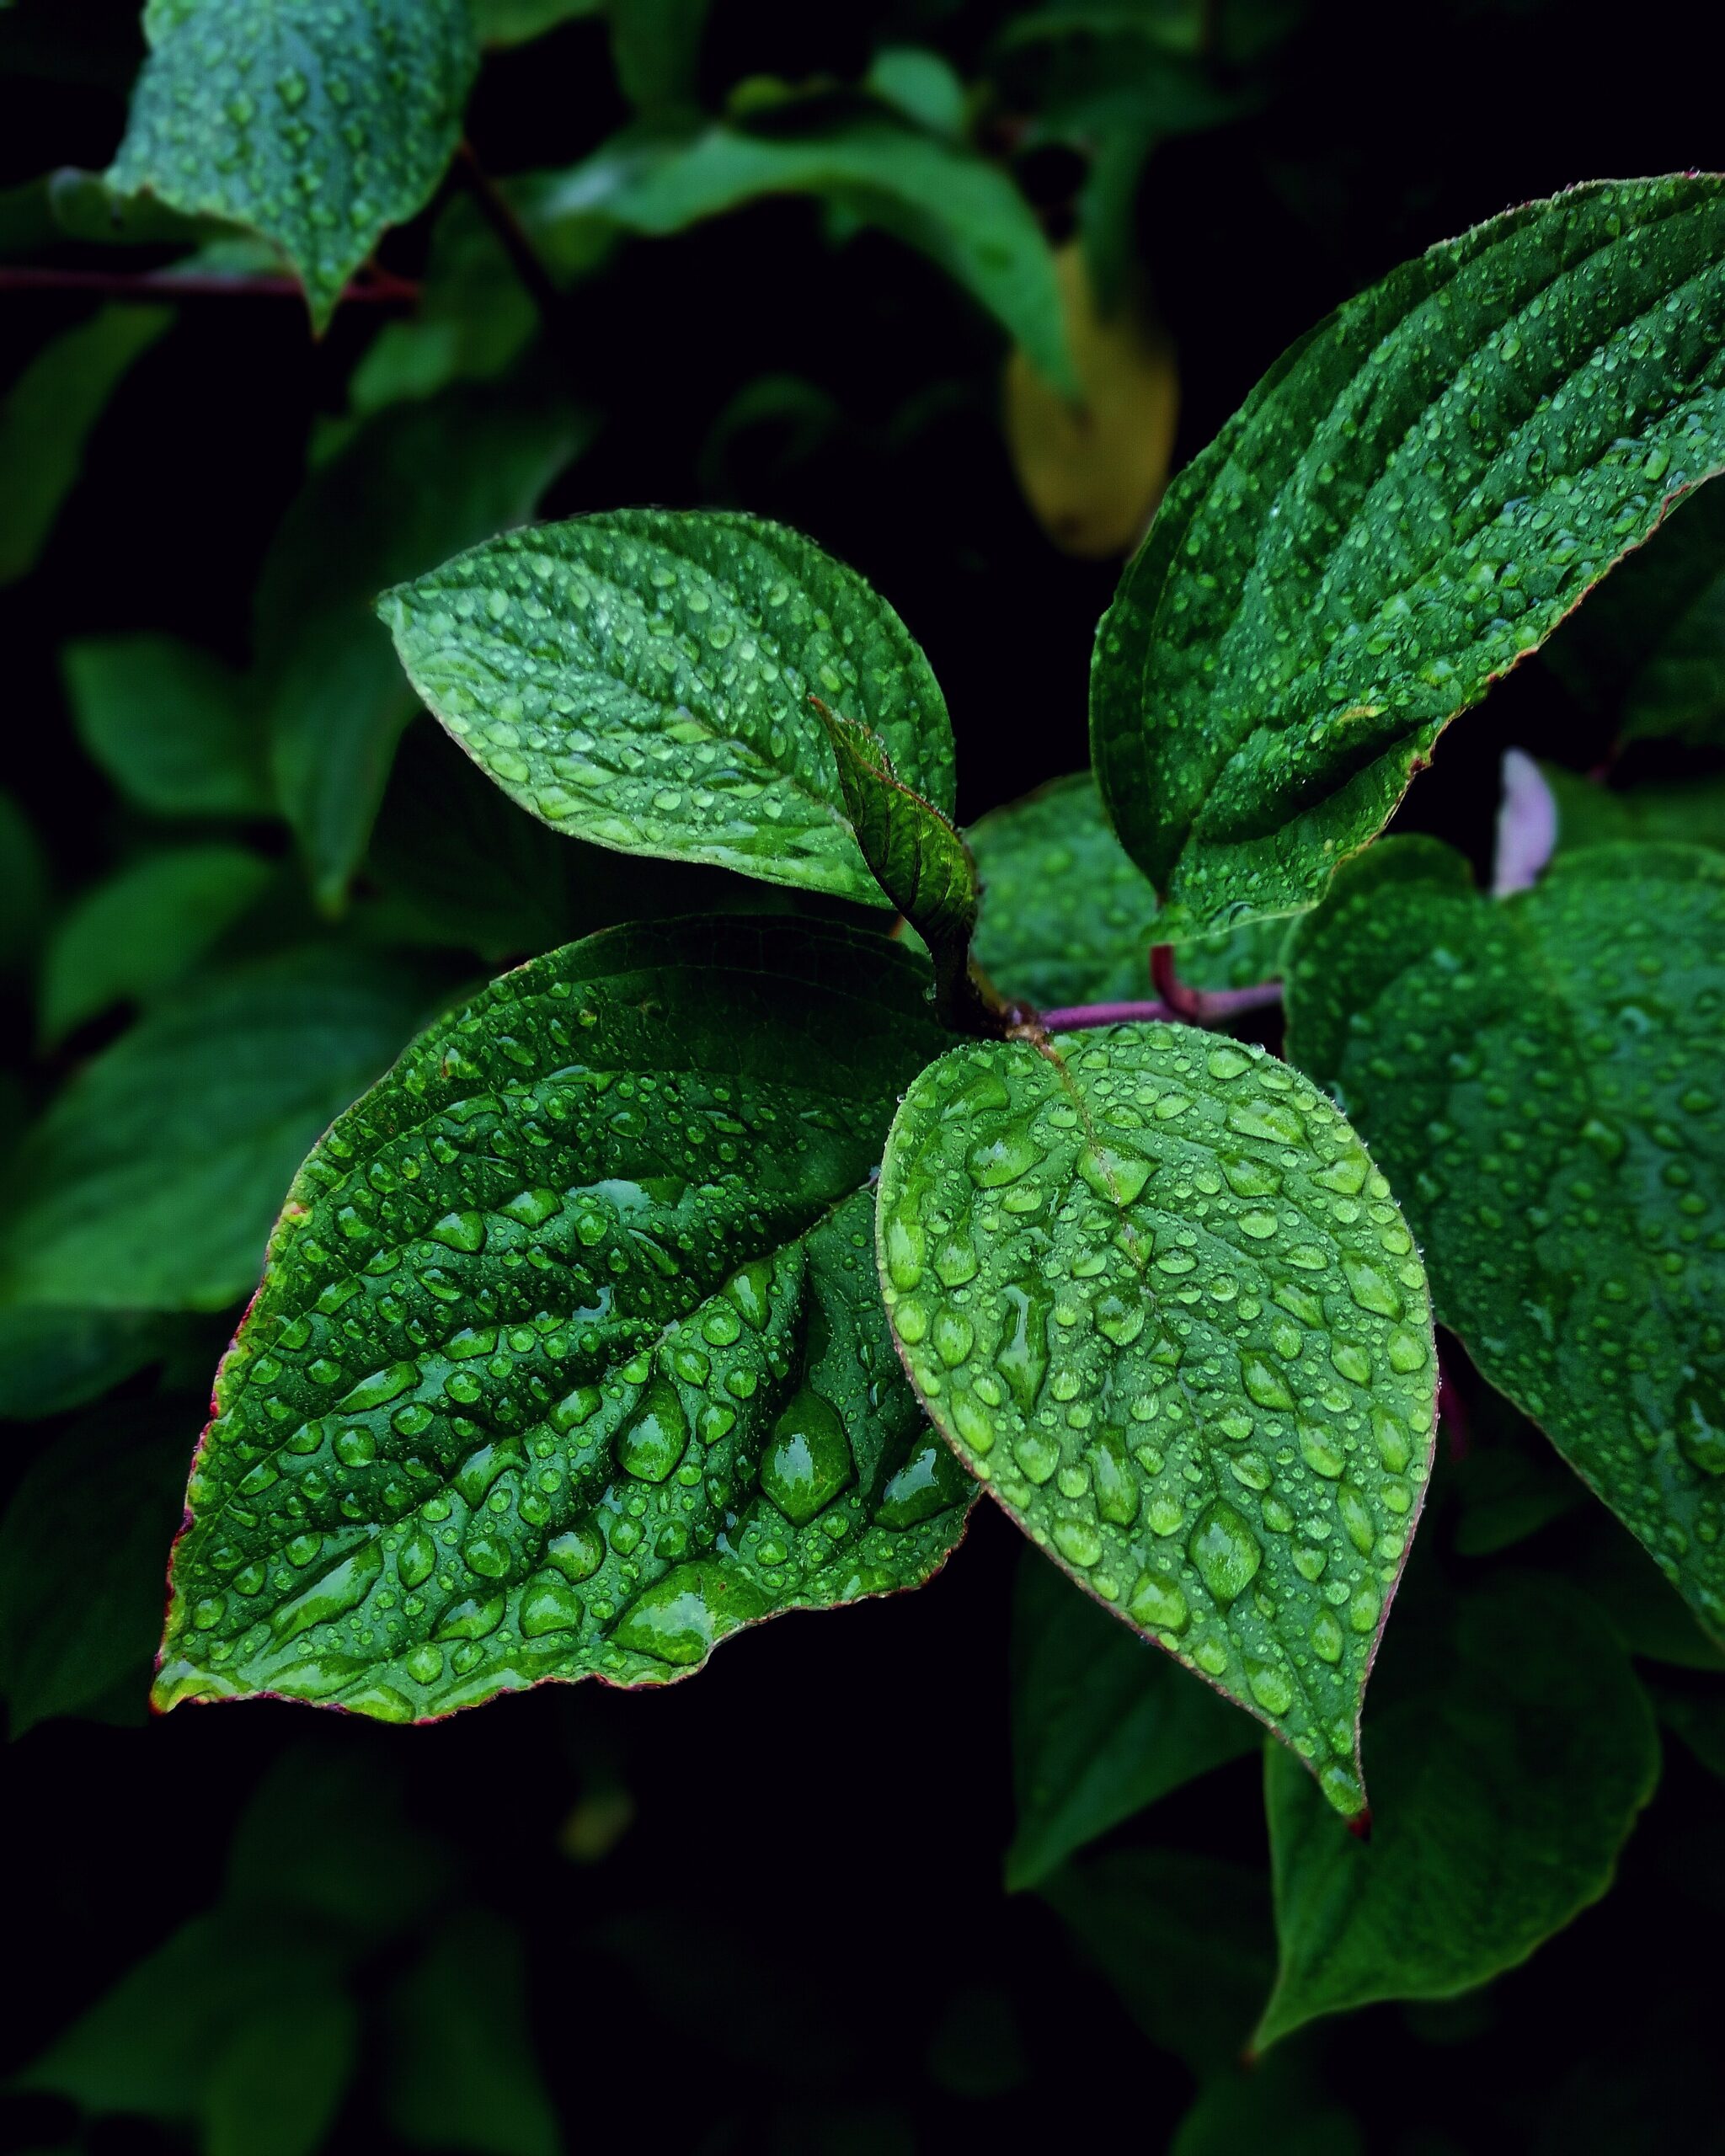 The Best Substitutes for Mint (Includes Fresh, Dried and Mint Extract) -  MAY EIGHTY FIVE